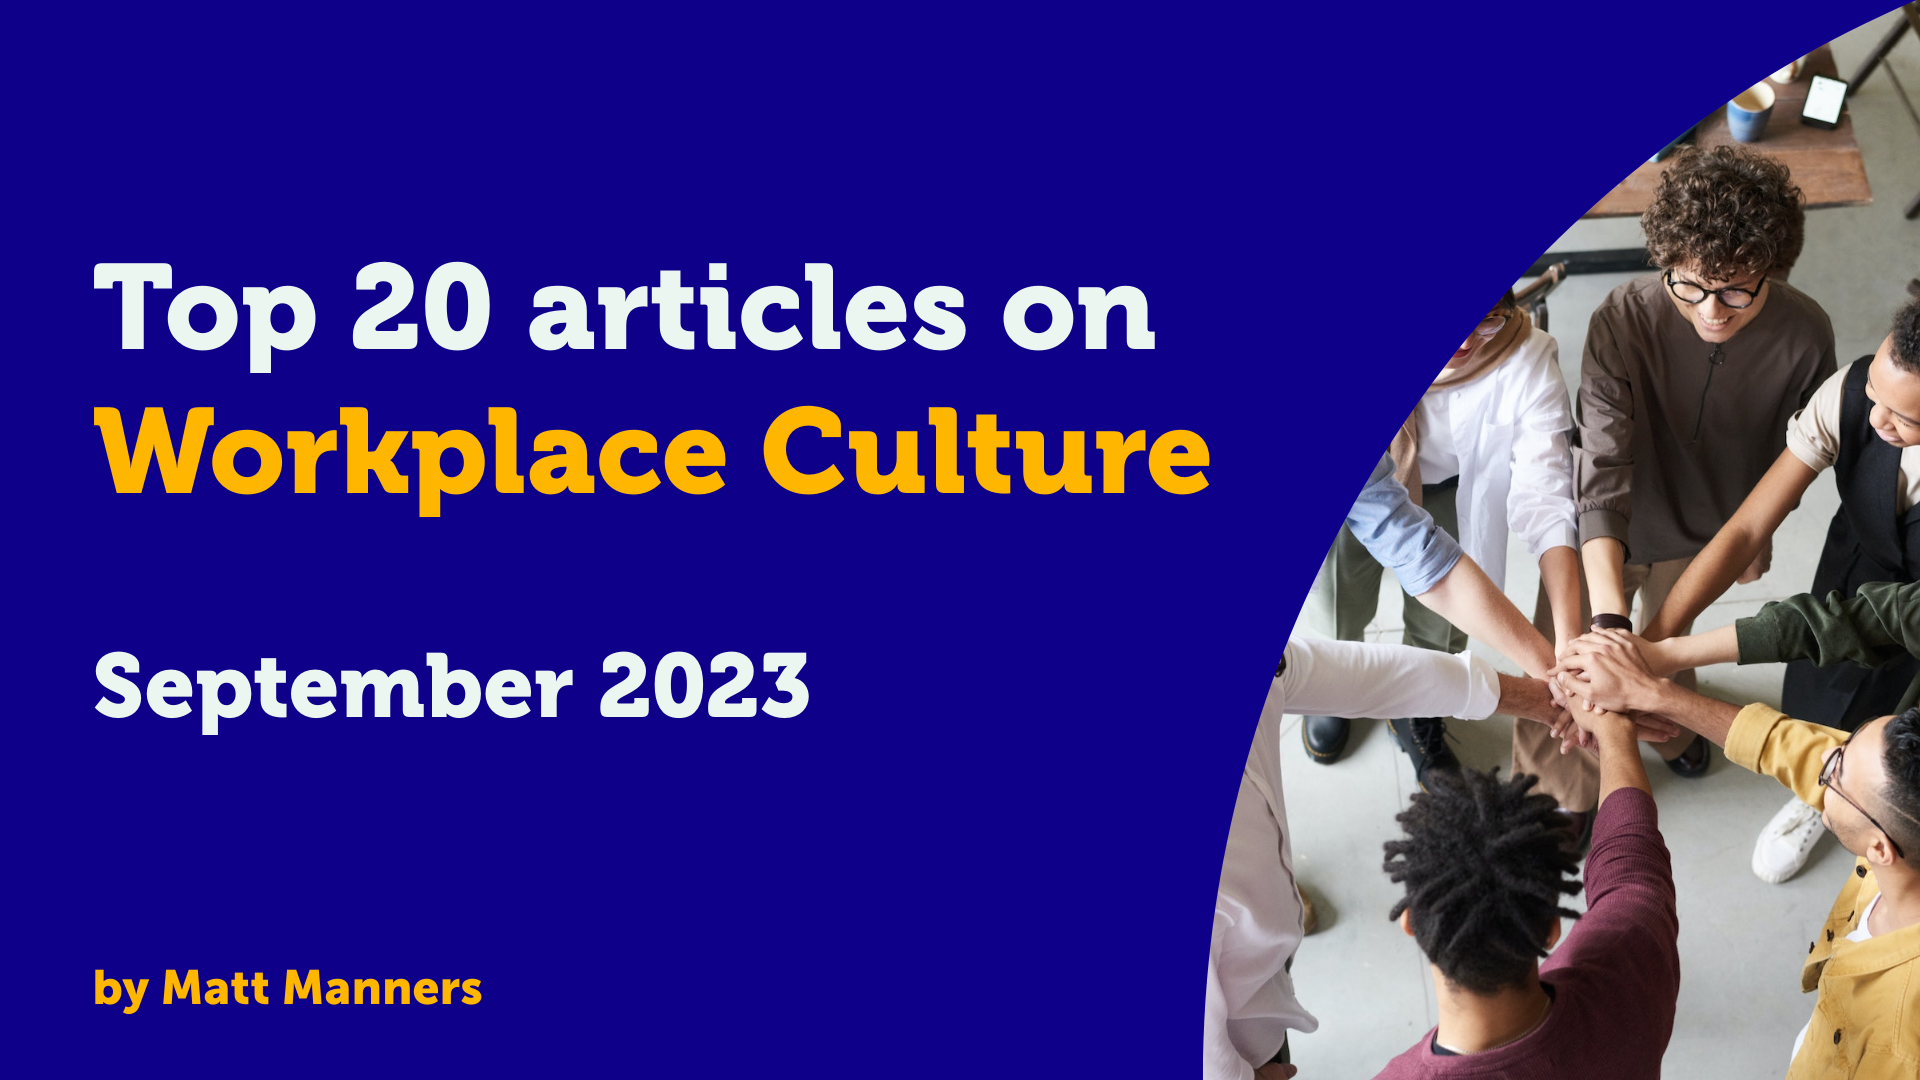 Top 20 articles on Workplace Culture in September 2023